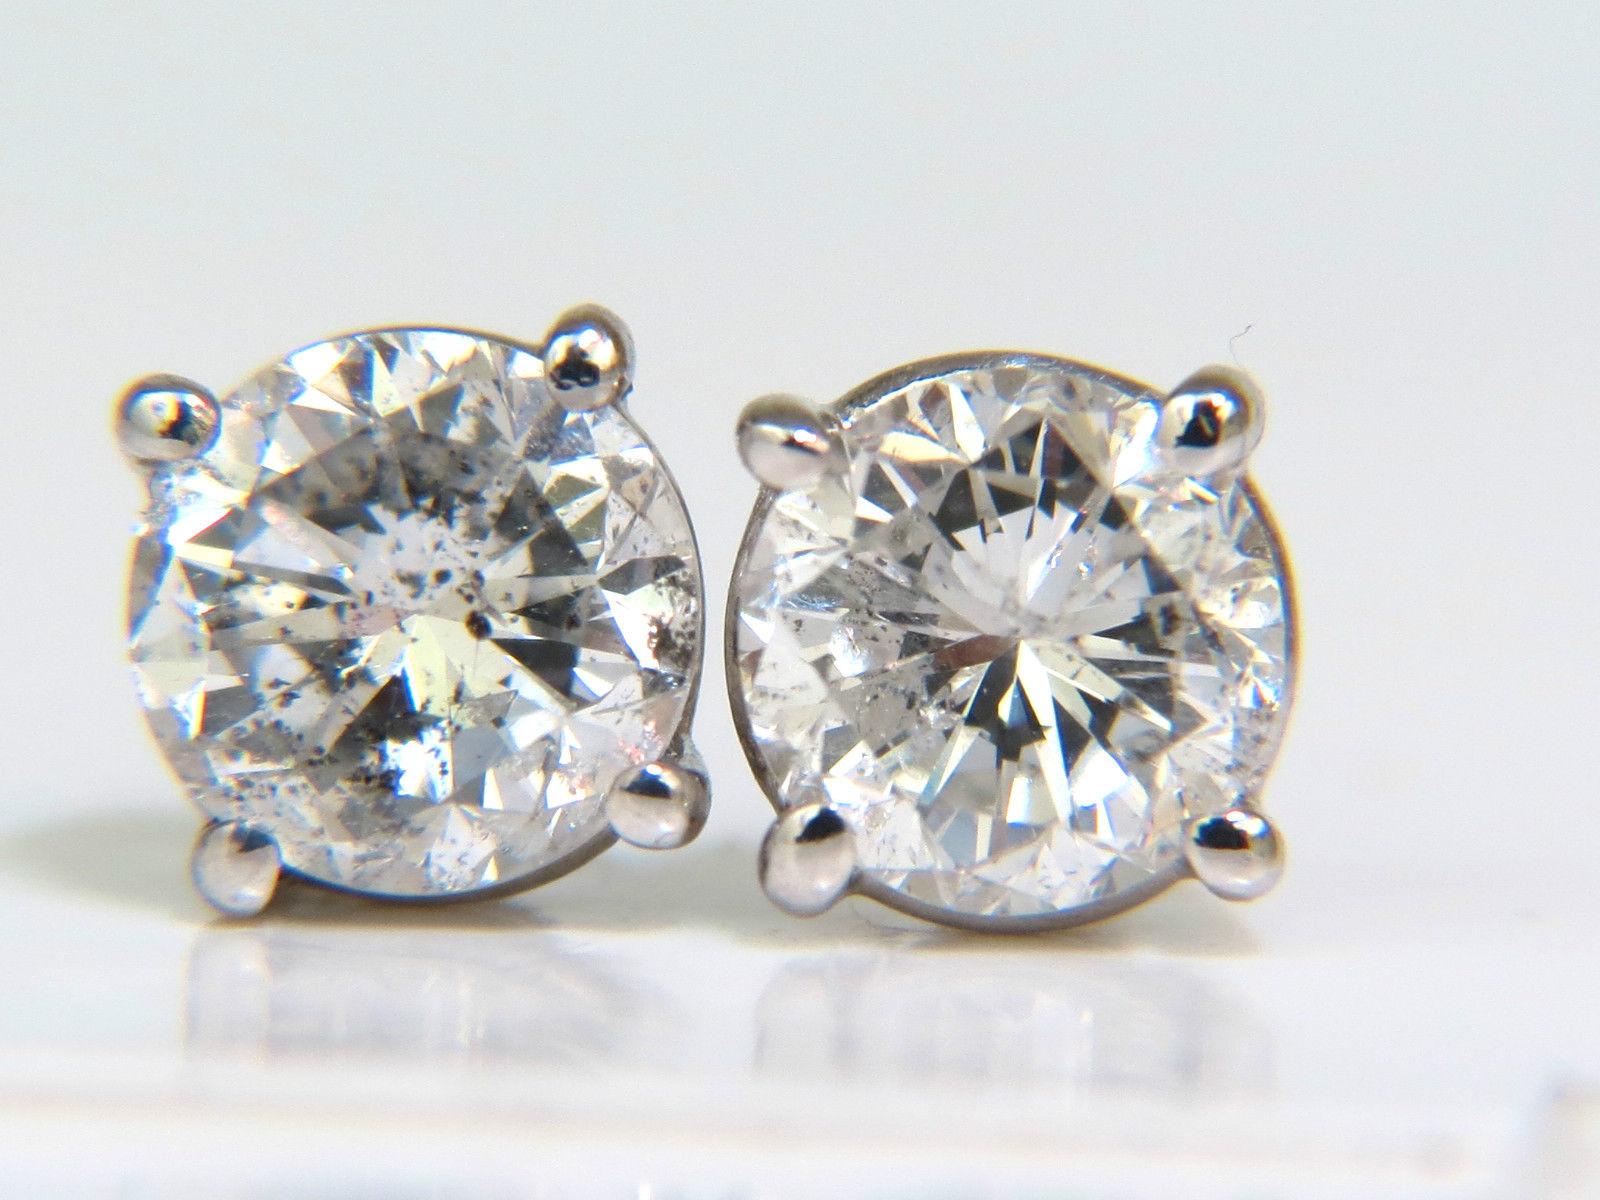 The Sparkles.

1.30ct. Round, Full cut diamond stud earrings.

 H-color, Si-2 Si-3 clarity.

Diamonds are with Top Cuts allowing maximum light for brilliance.

5.3mm wide

1.2 grams.

$5,000 appraisal will accompany